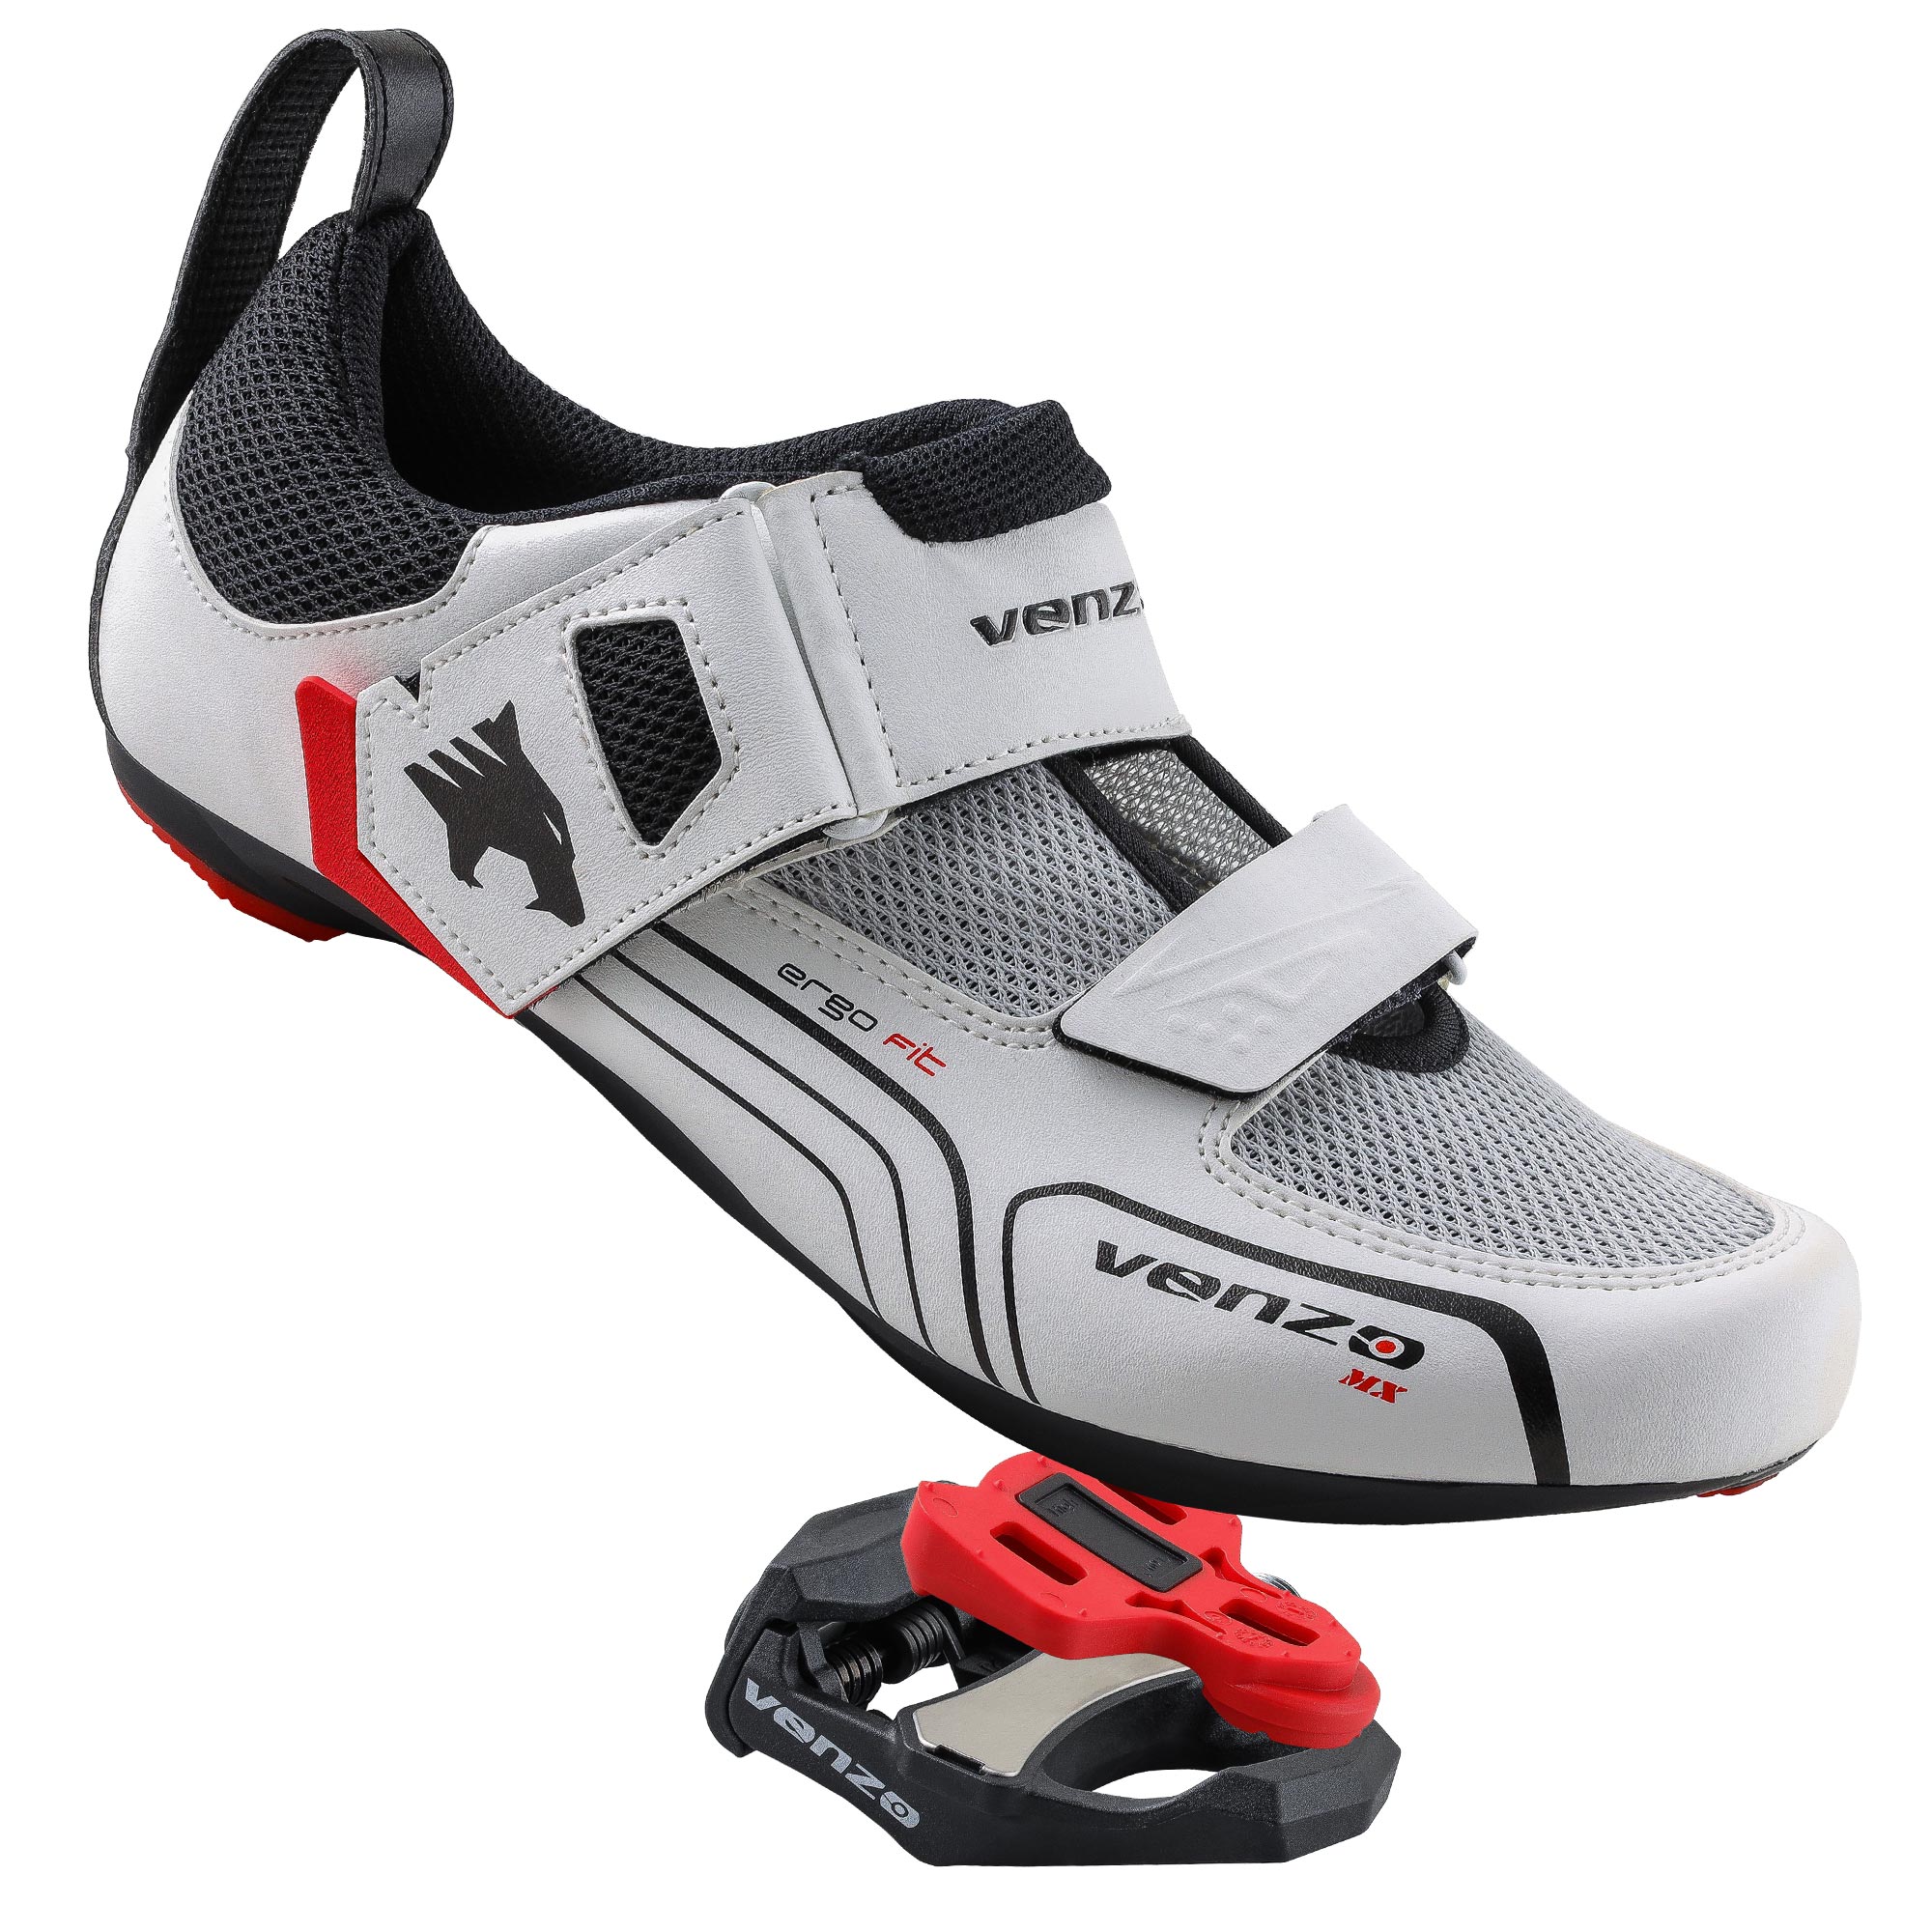 Venzo Cycling Bicycle Road Bike White Shoes with Clipless Pedals Look Keo Compatible 9/16" with Cleats  Size 46